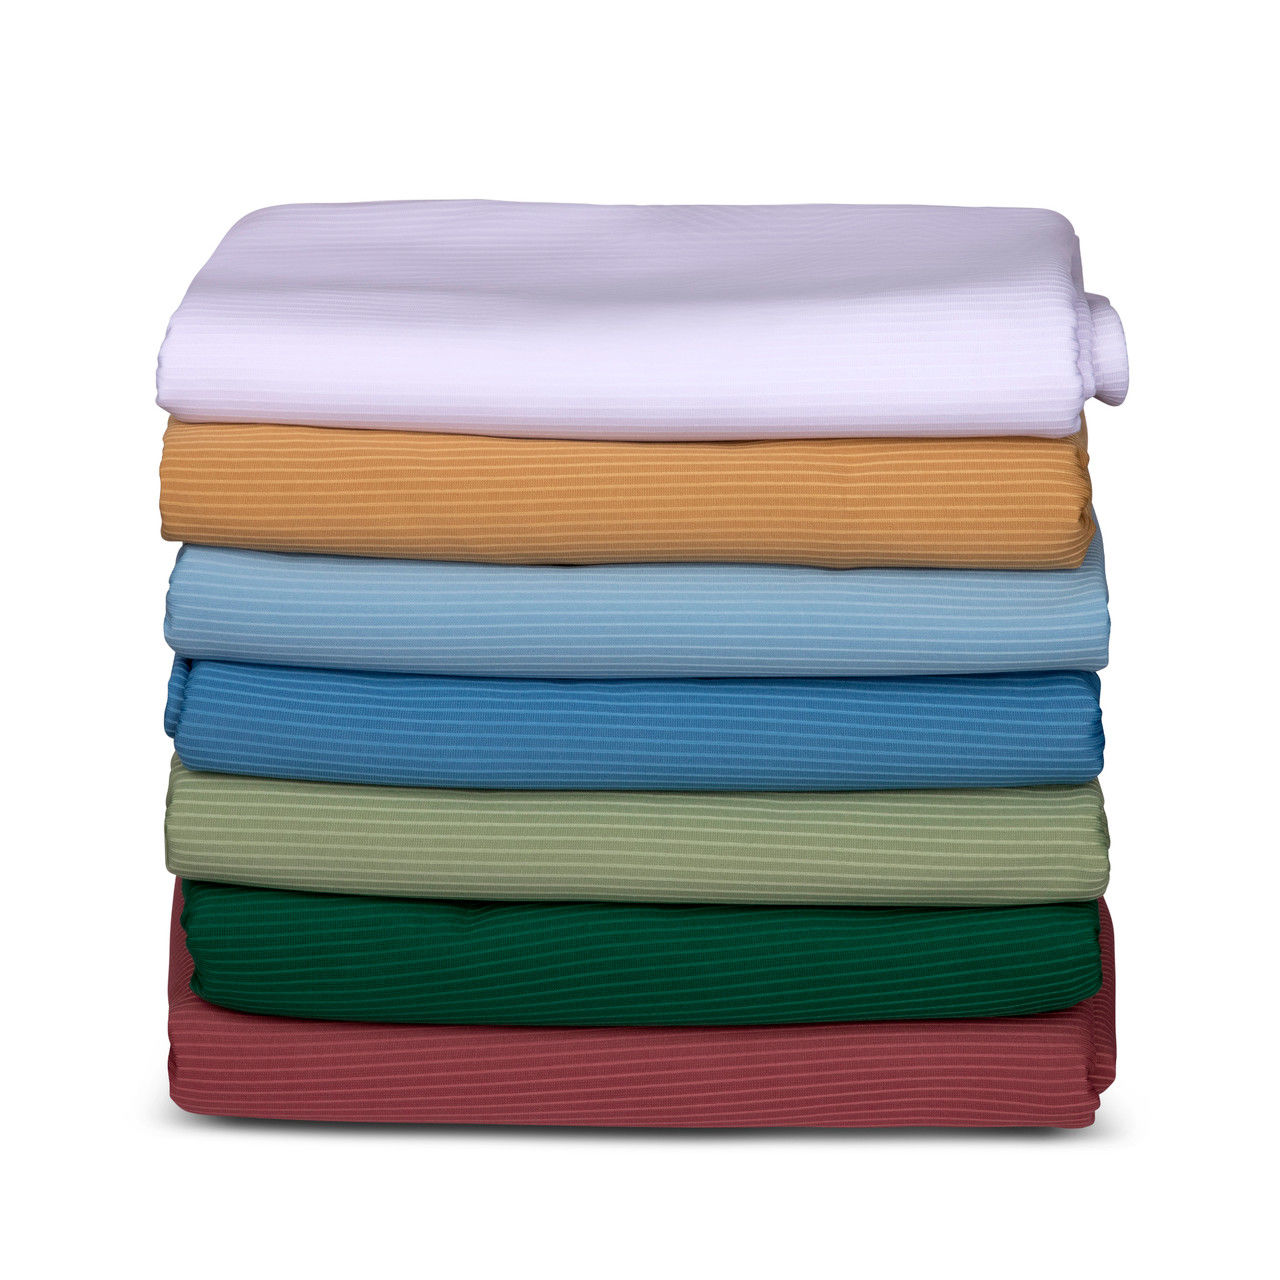 Can you specify the material of the ribcord bedspread twin from Concord?